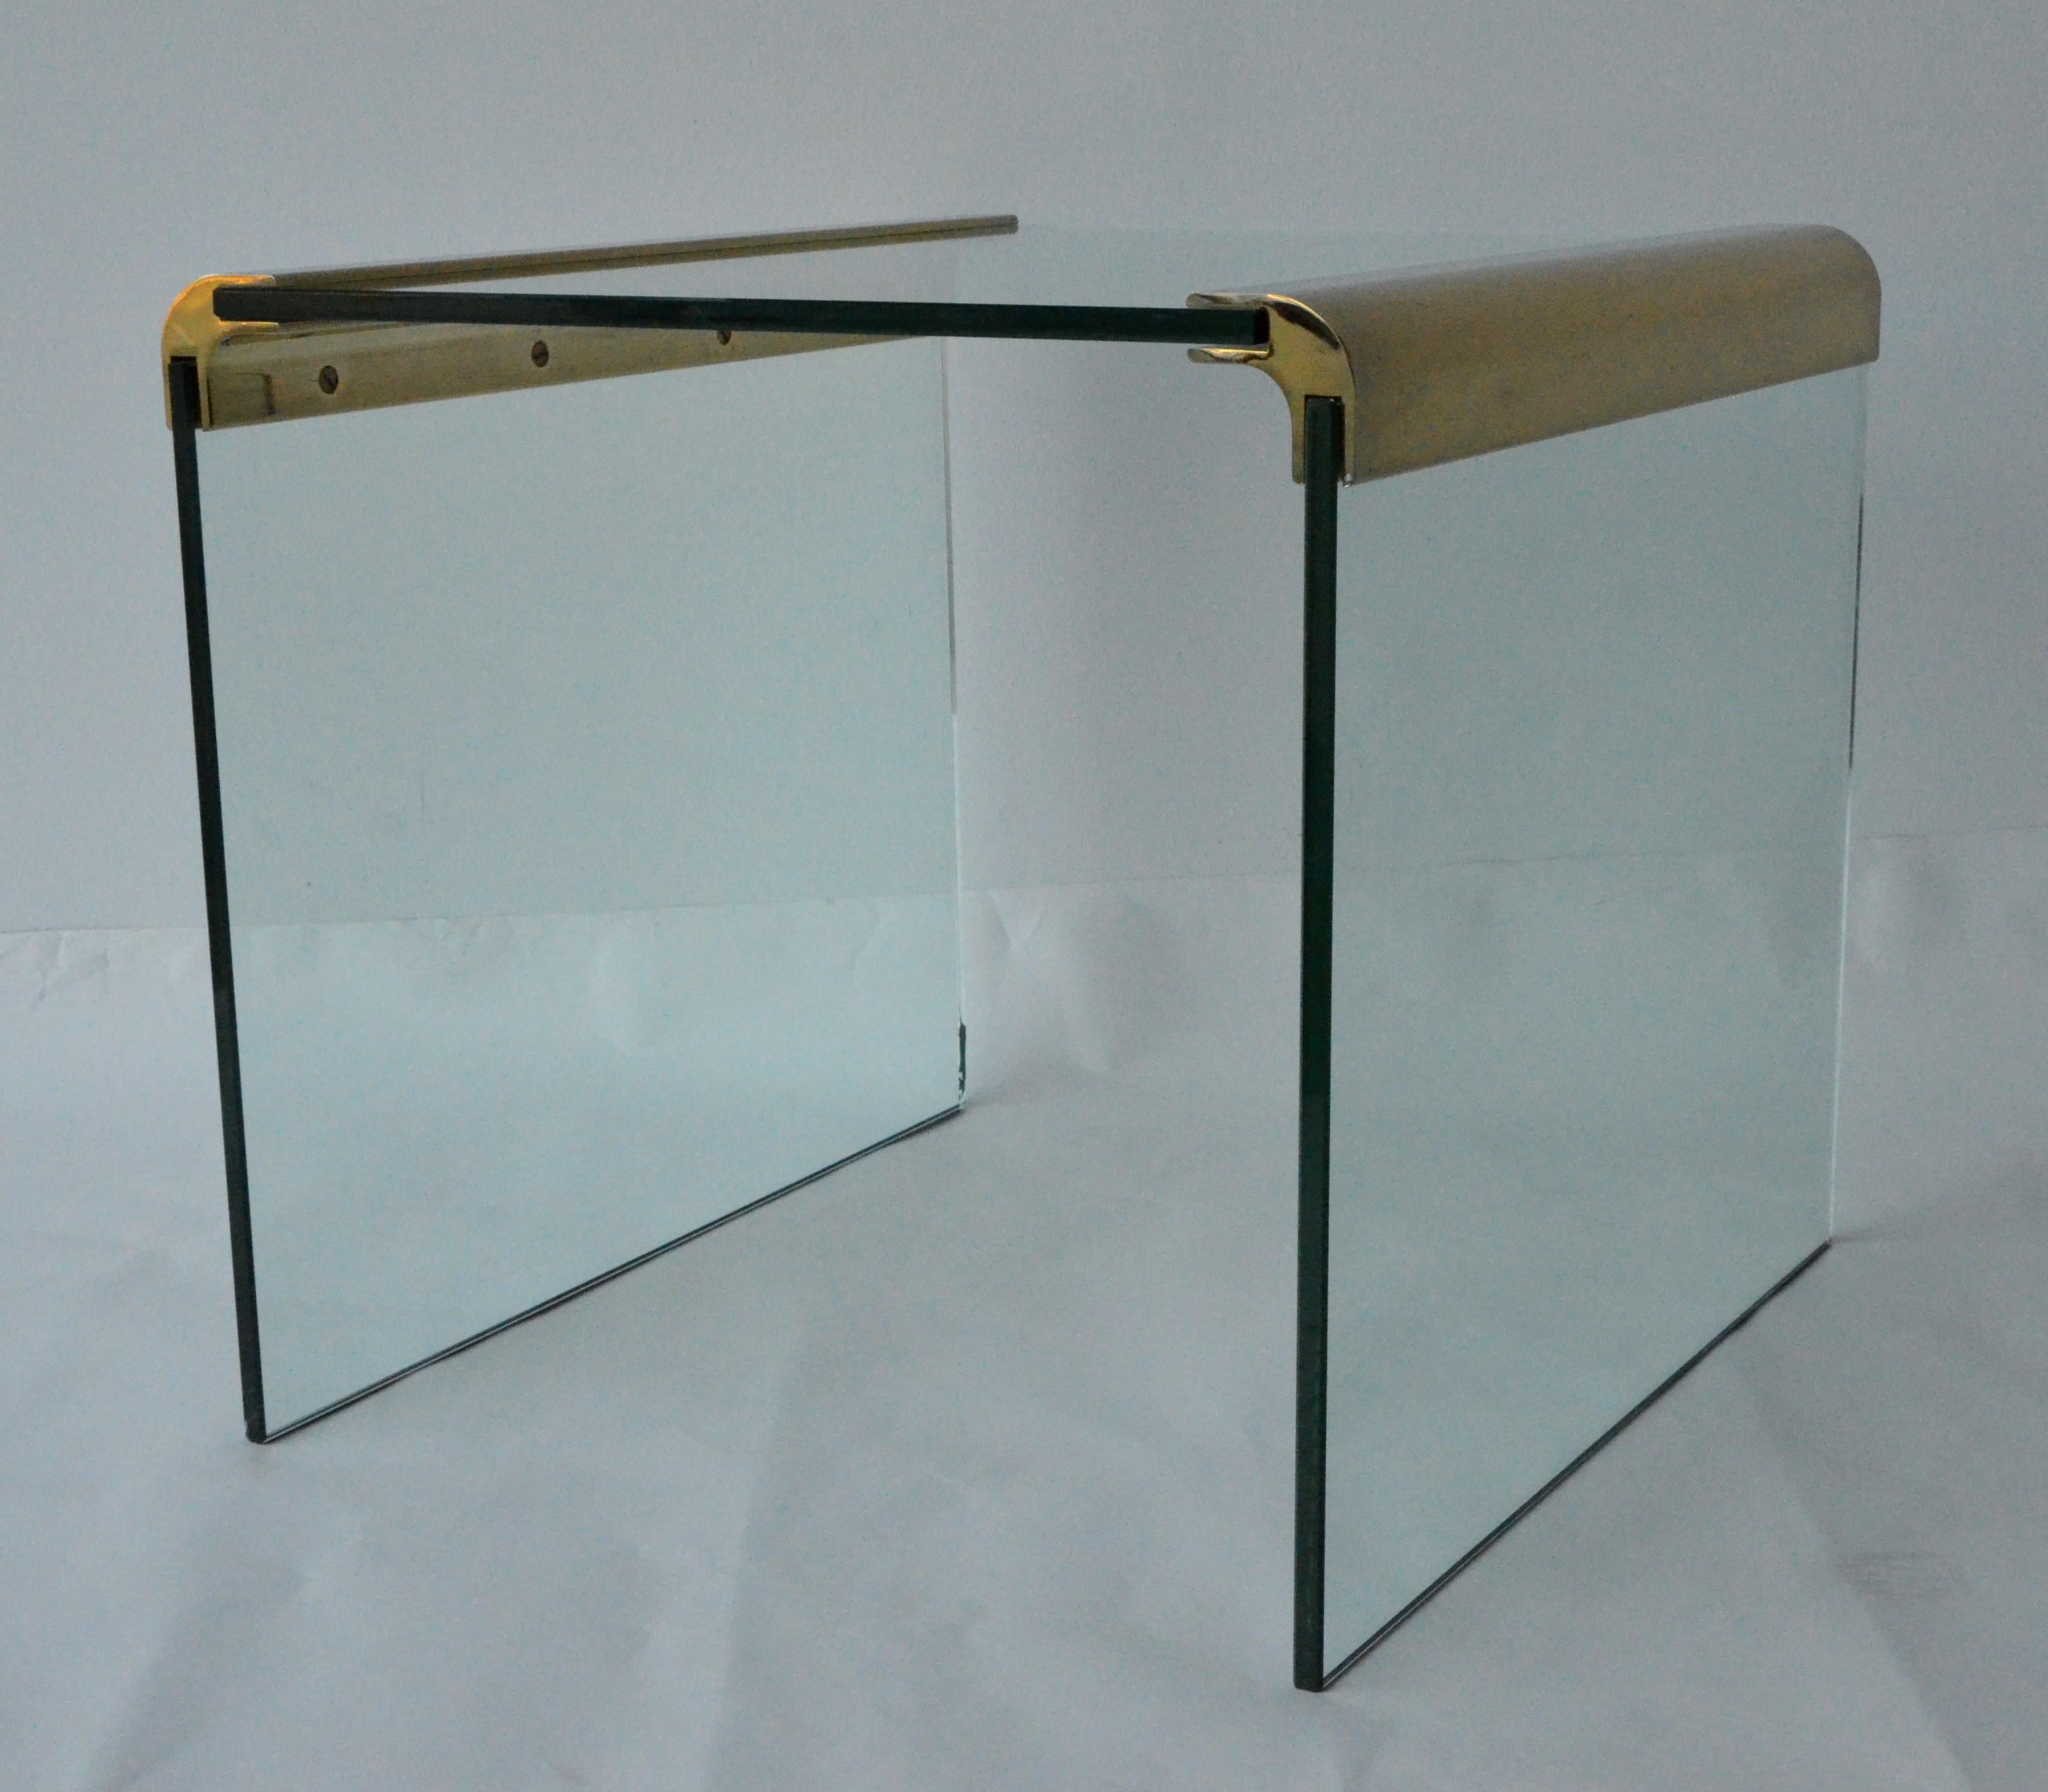 Offered is a Mid-Century Modern pace waterfall brass bar and three sided glass end or side table. Leon Rosen in York City founded pace and was in business from the 1970s-2001. The inimitable Rosen style used exotic wood veneers that had high-gloss